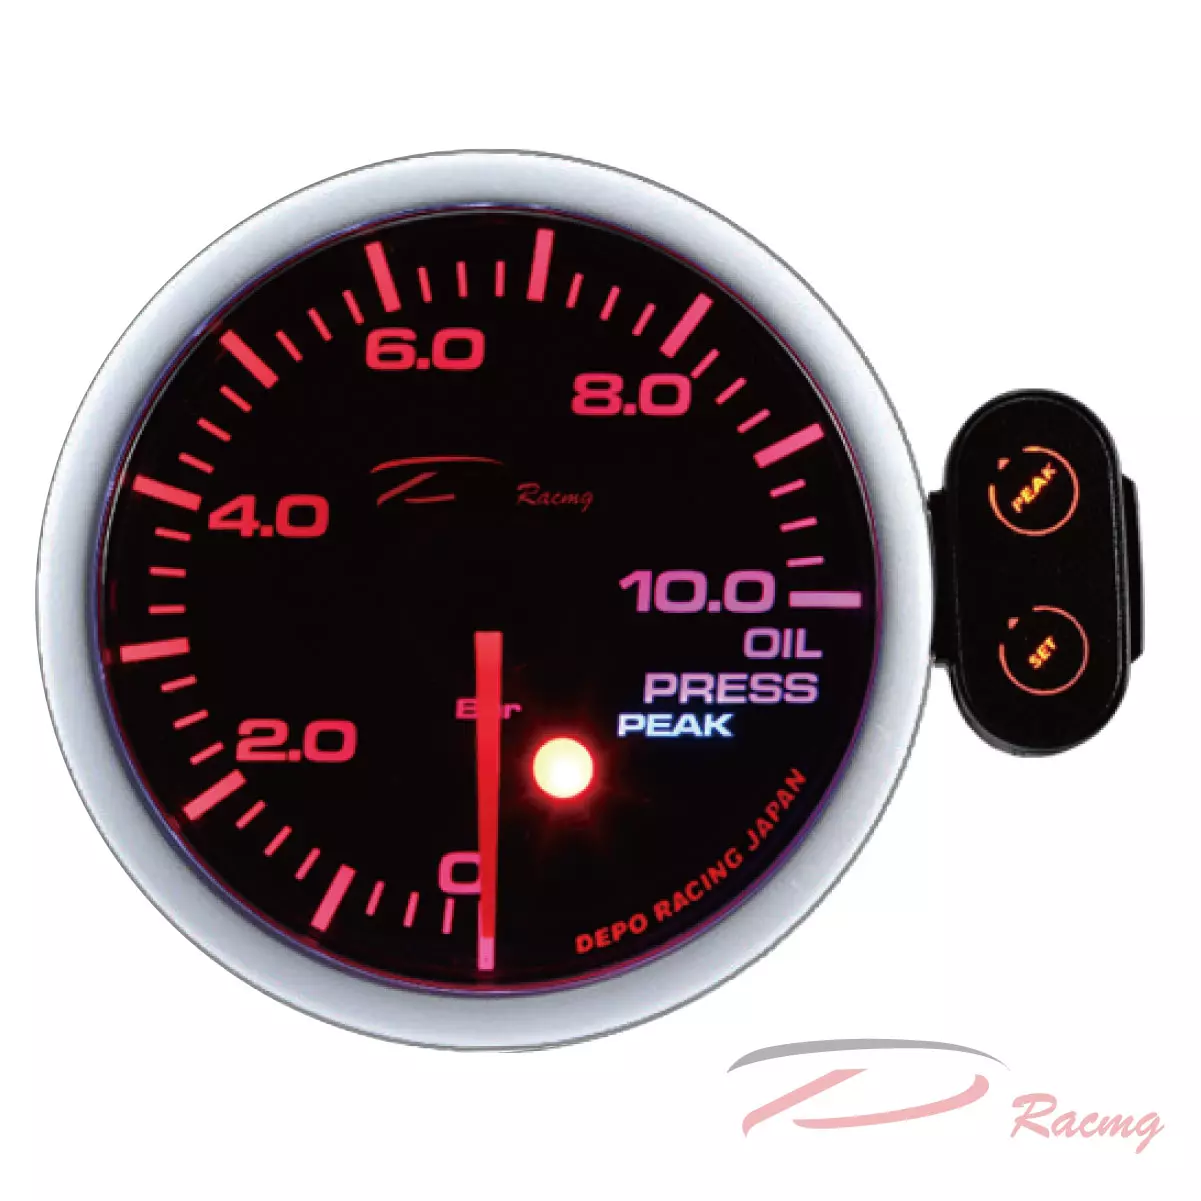 Dracing, Depo racing, AutoMeter, AutoMeter, oil pressure gauges, oil press gauges, best oil pressure gauges, performance oil pressure gauges, accurate oil pressure gauges, durable oil pressure gauges, professional oil pressure gauges, racing oil pressure gauges, car oil pressure gauges, truck oil pressure gauges, suv oil pressure gauges, motorcycle oil pressure gauges, 2-1/16" oil pressure gauges, 2-5/8" oil pressure gauges, 0-80 psi oil pressure gauges, 0-100 psi oil pressure gauges, 5-100 psi oil pressure gauges, 0-120 psi oil pressure gauges, 0-150 psi oil pressure gauges, 0-7BARS oil pressure gauges, quad gauges, dual gauges